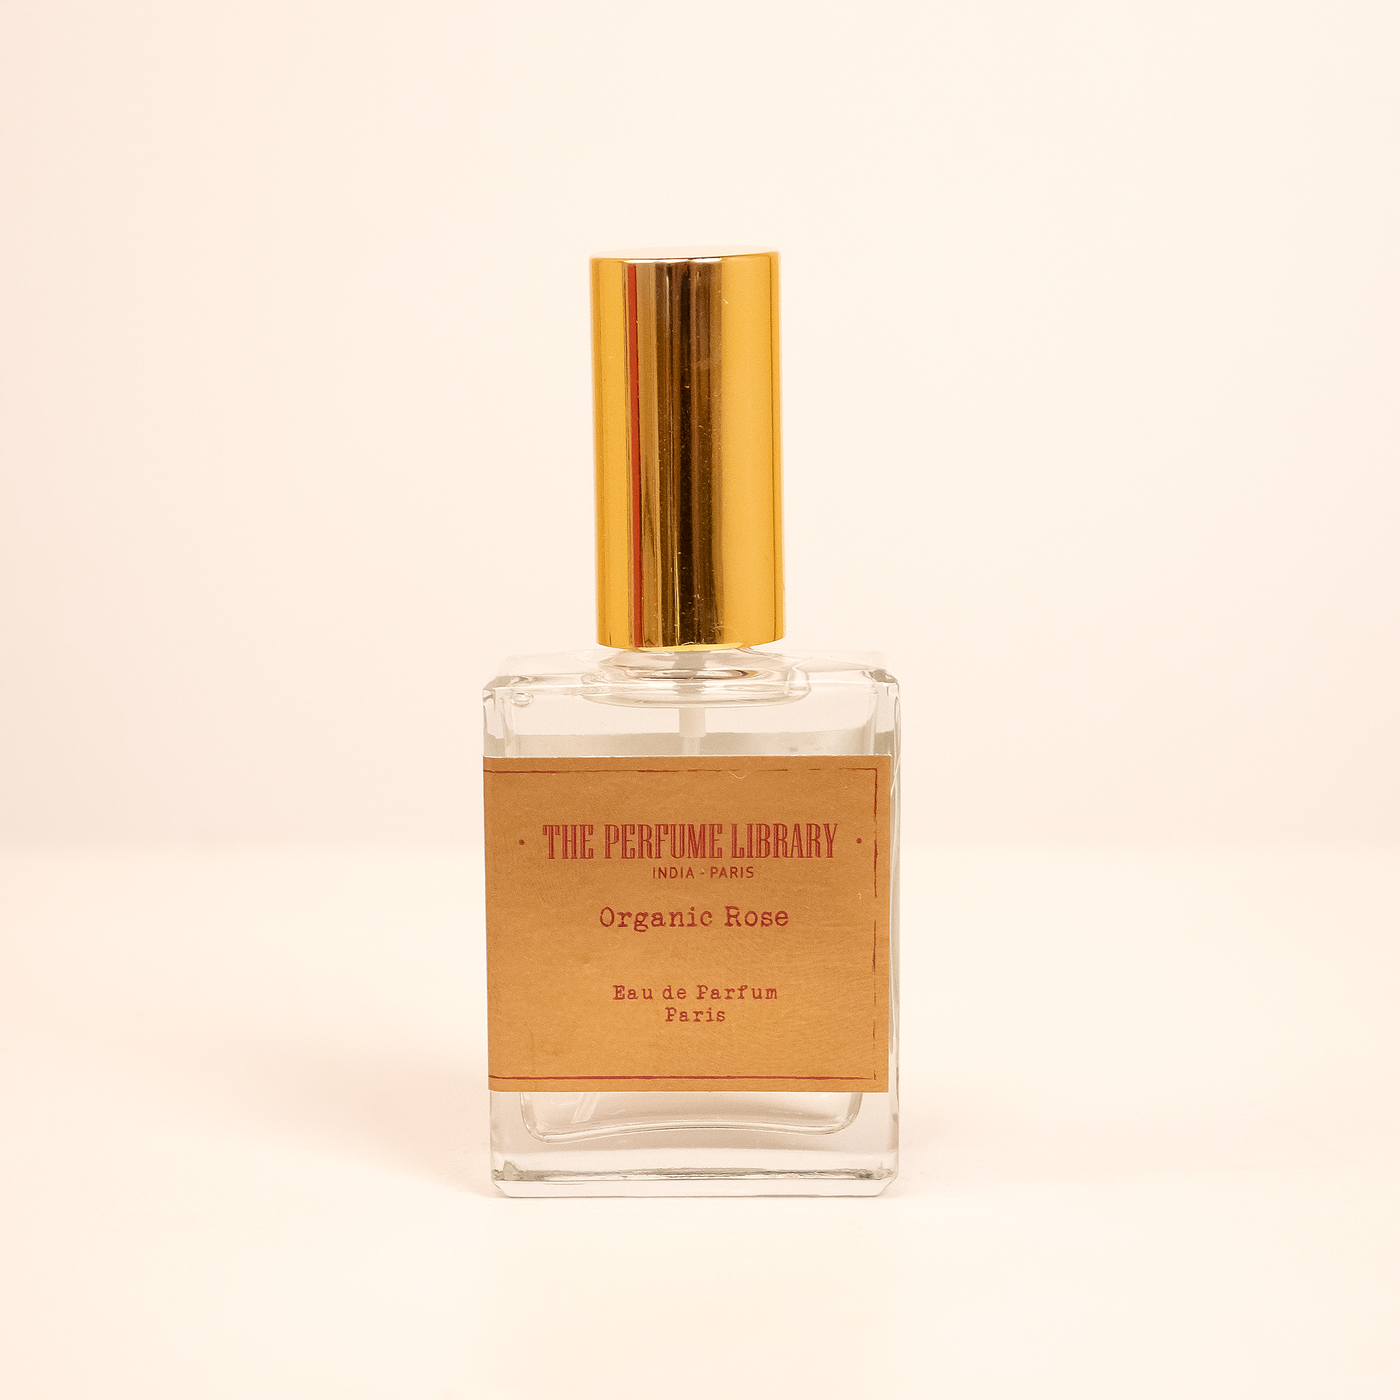 The Perfume Library Organic Rose